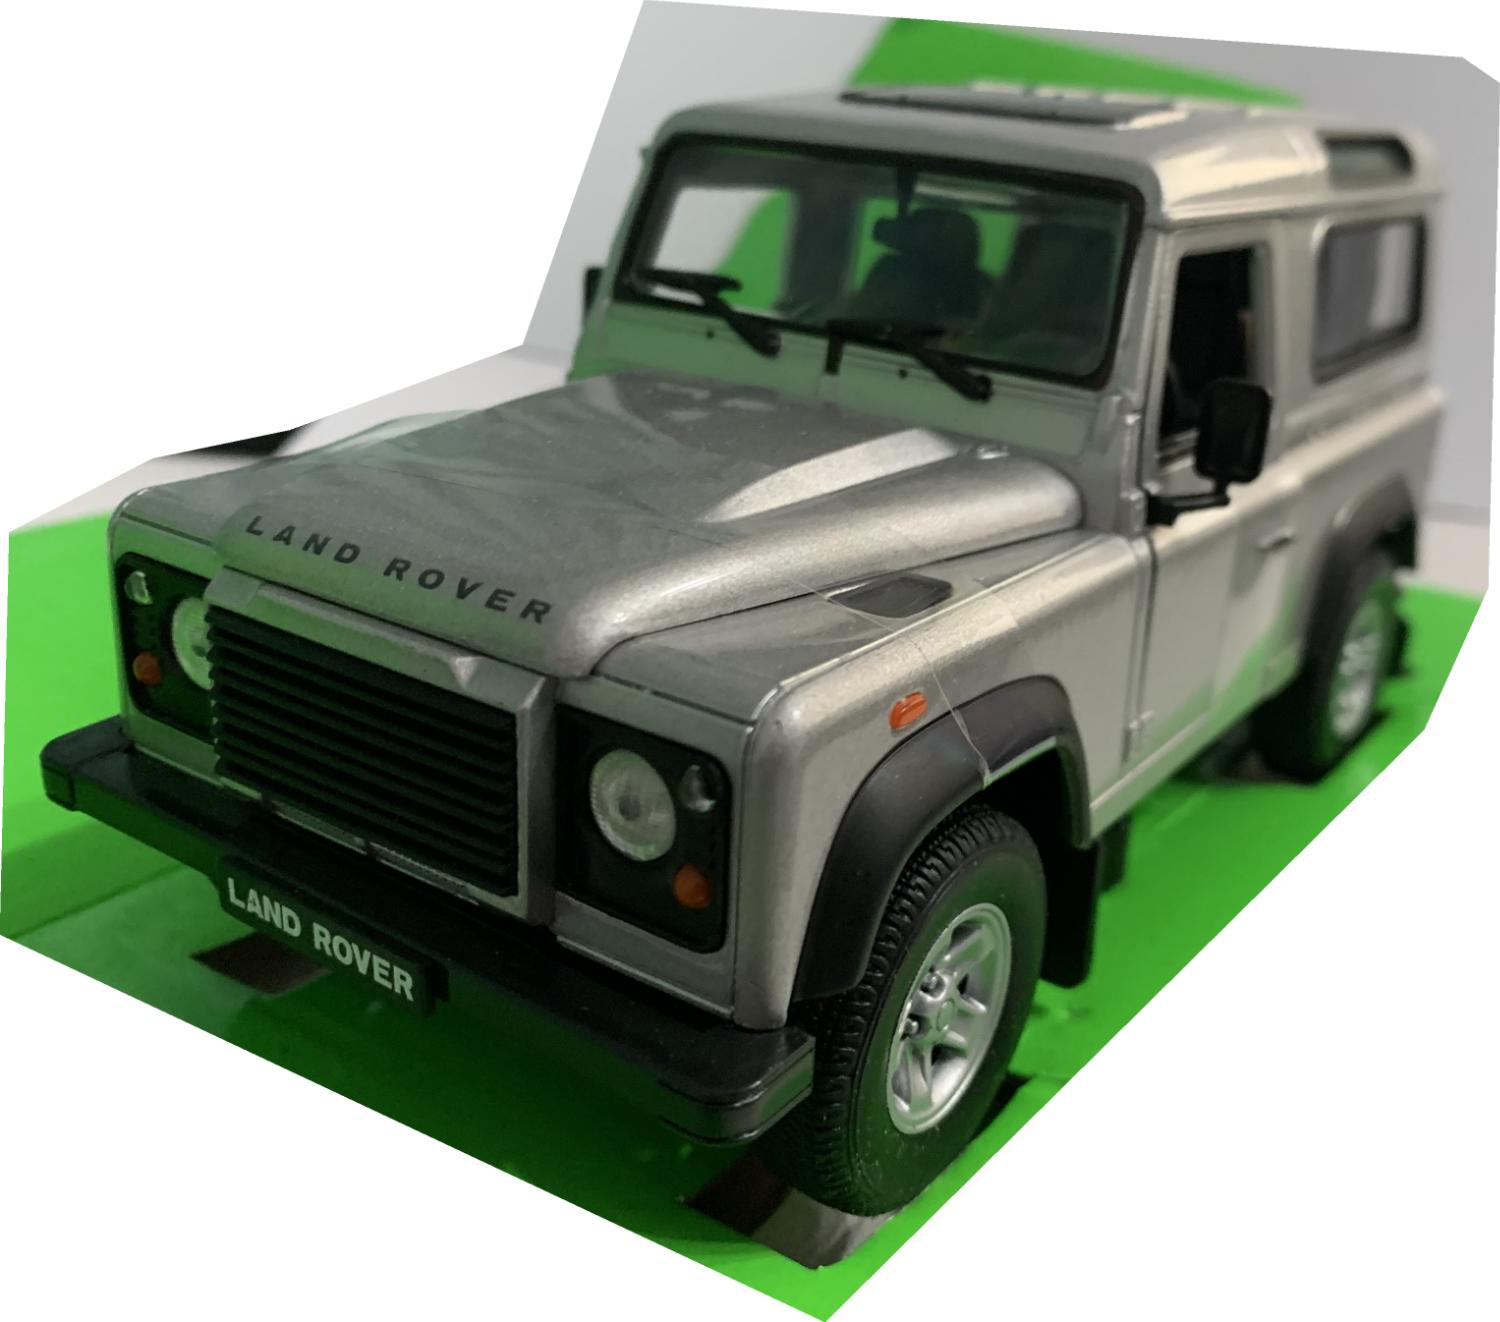 Land Rover Defender 90 in silver 1:24 scale diecast model from Welly